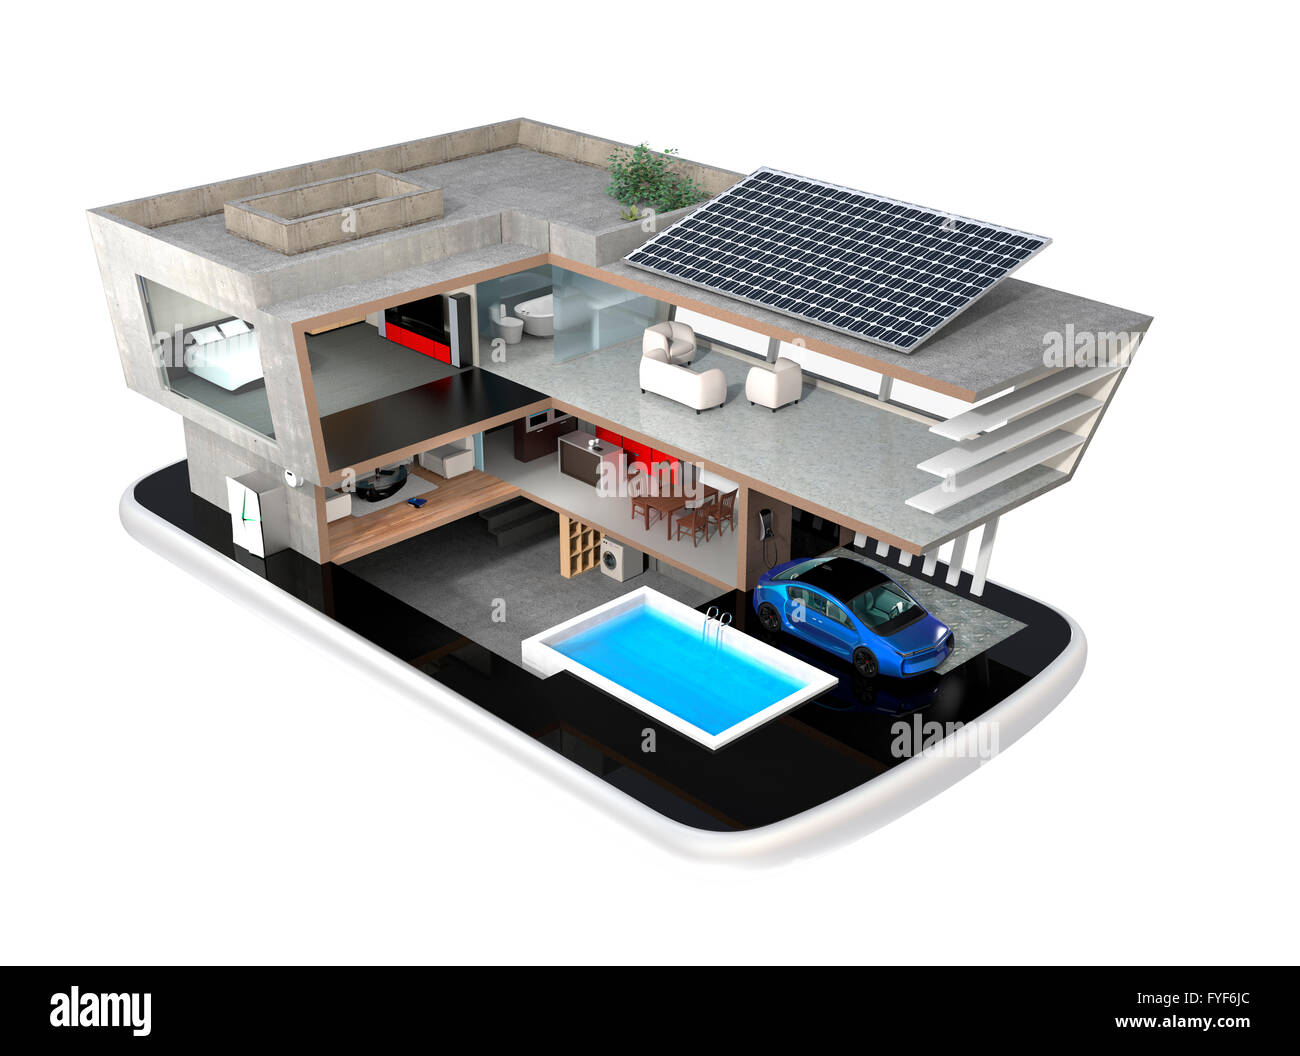 Smart house on a smart phone. The smart house equippd with solar panels, energy saving appliances, and storage battery system. Stock Photo